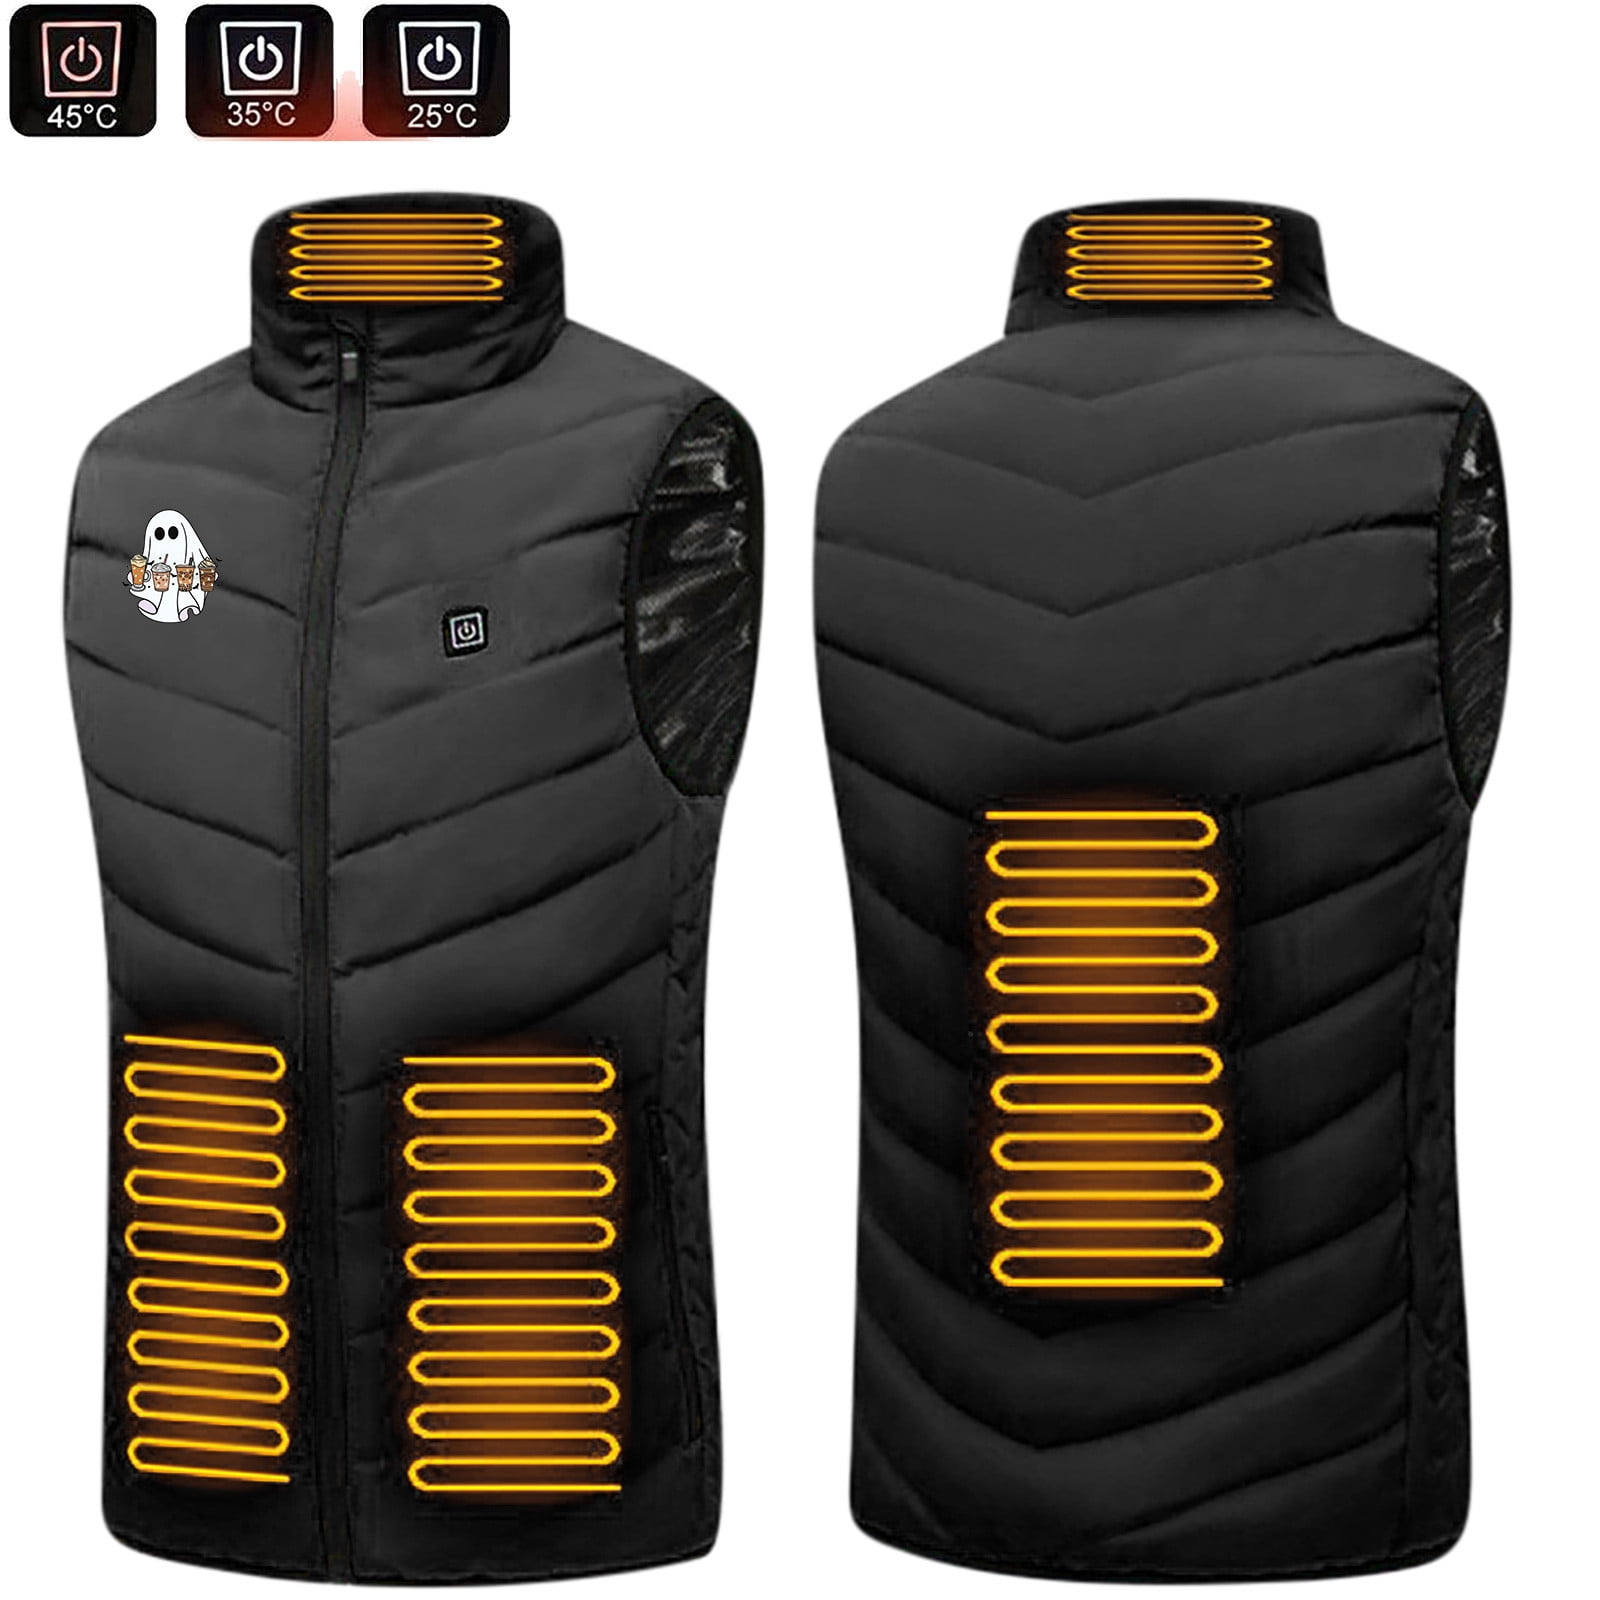 Meichang Men Women Heated Jackets USB Charging Heating for 8 Hours